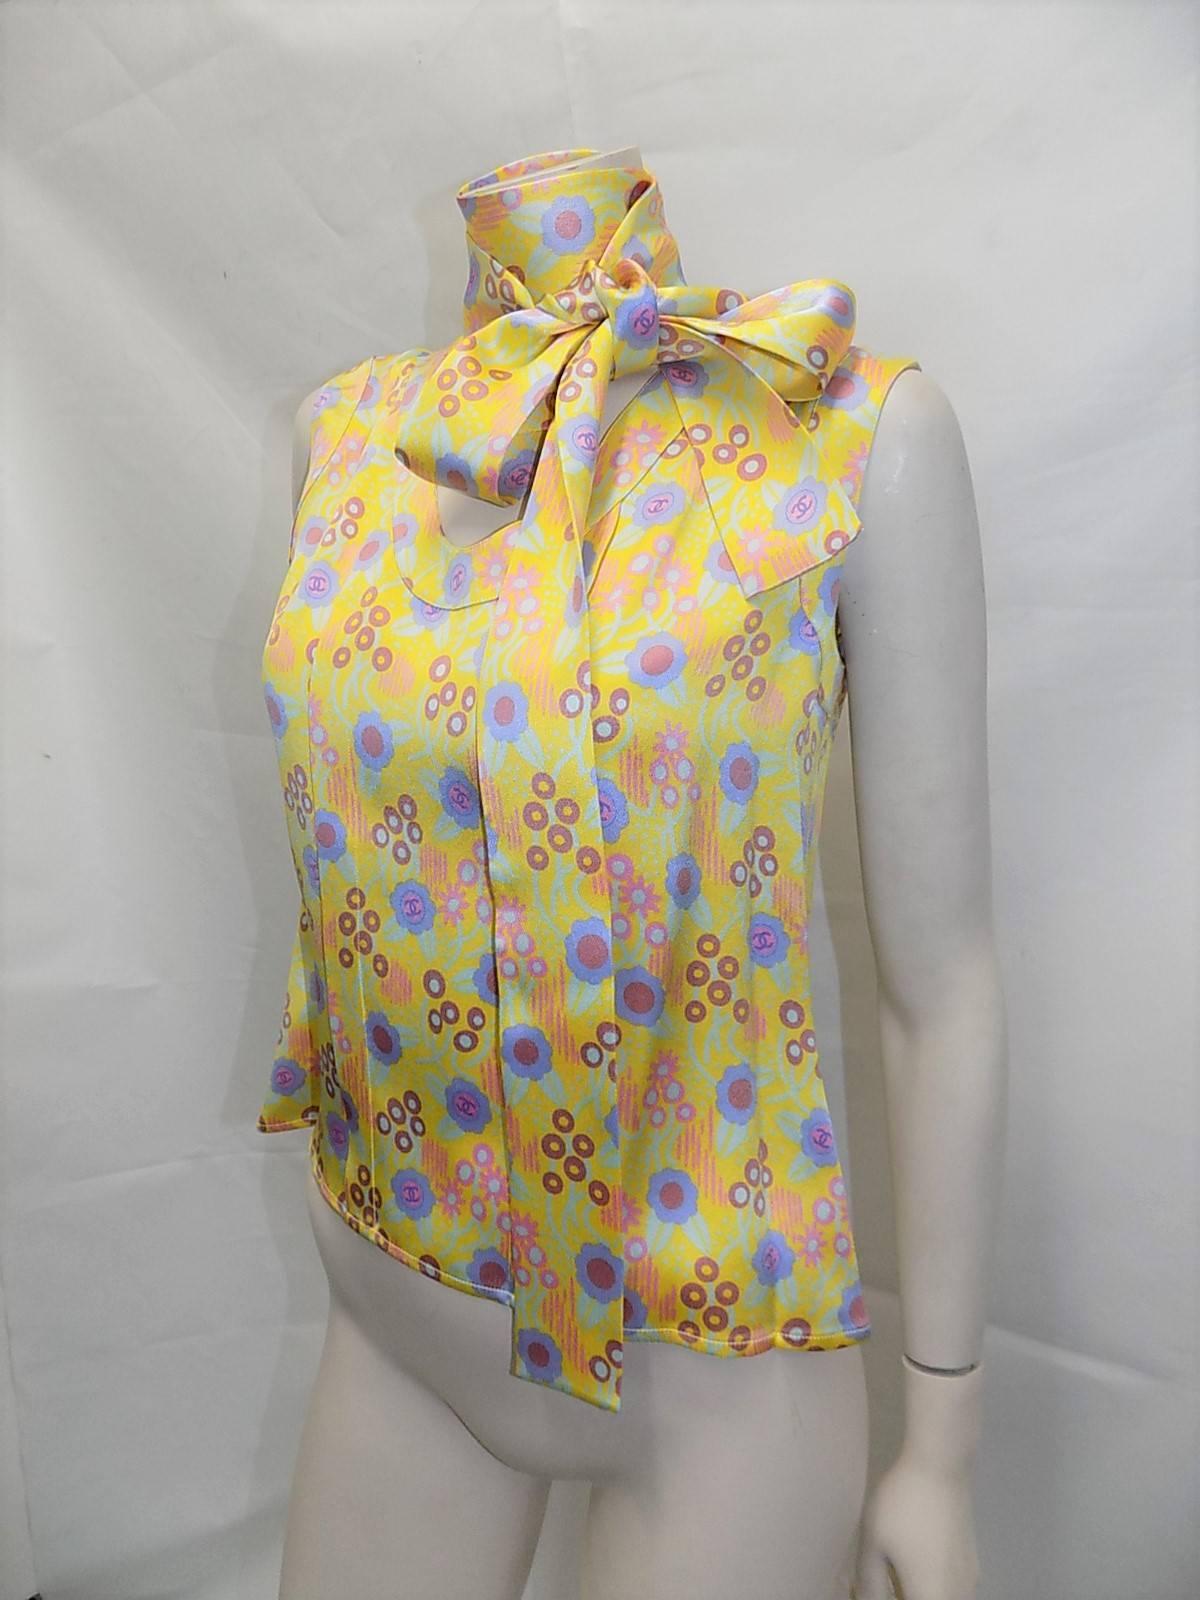 CHANEL Iconic Yellow Silk Print Blouse Absolutely Outstanding Everything we come to expect from Chanel. Elegant Classic Luxury. double CC's all over the top, the yellow color is just beautiful and has a delicate scoop neckline and buttons up the